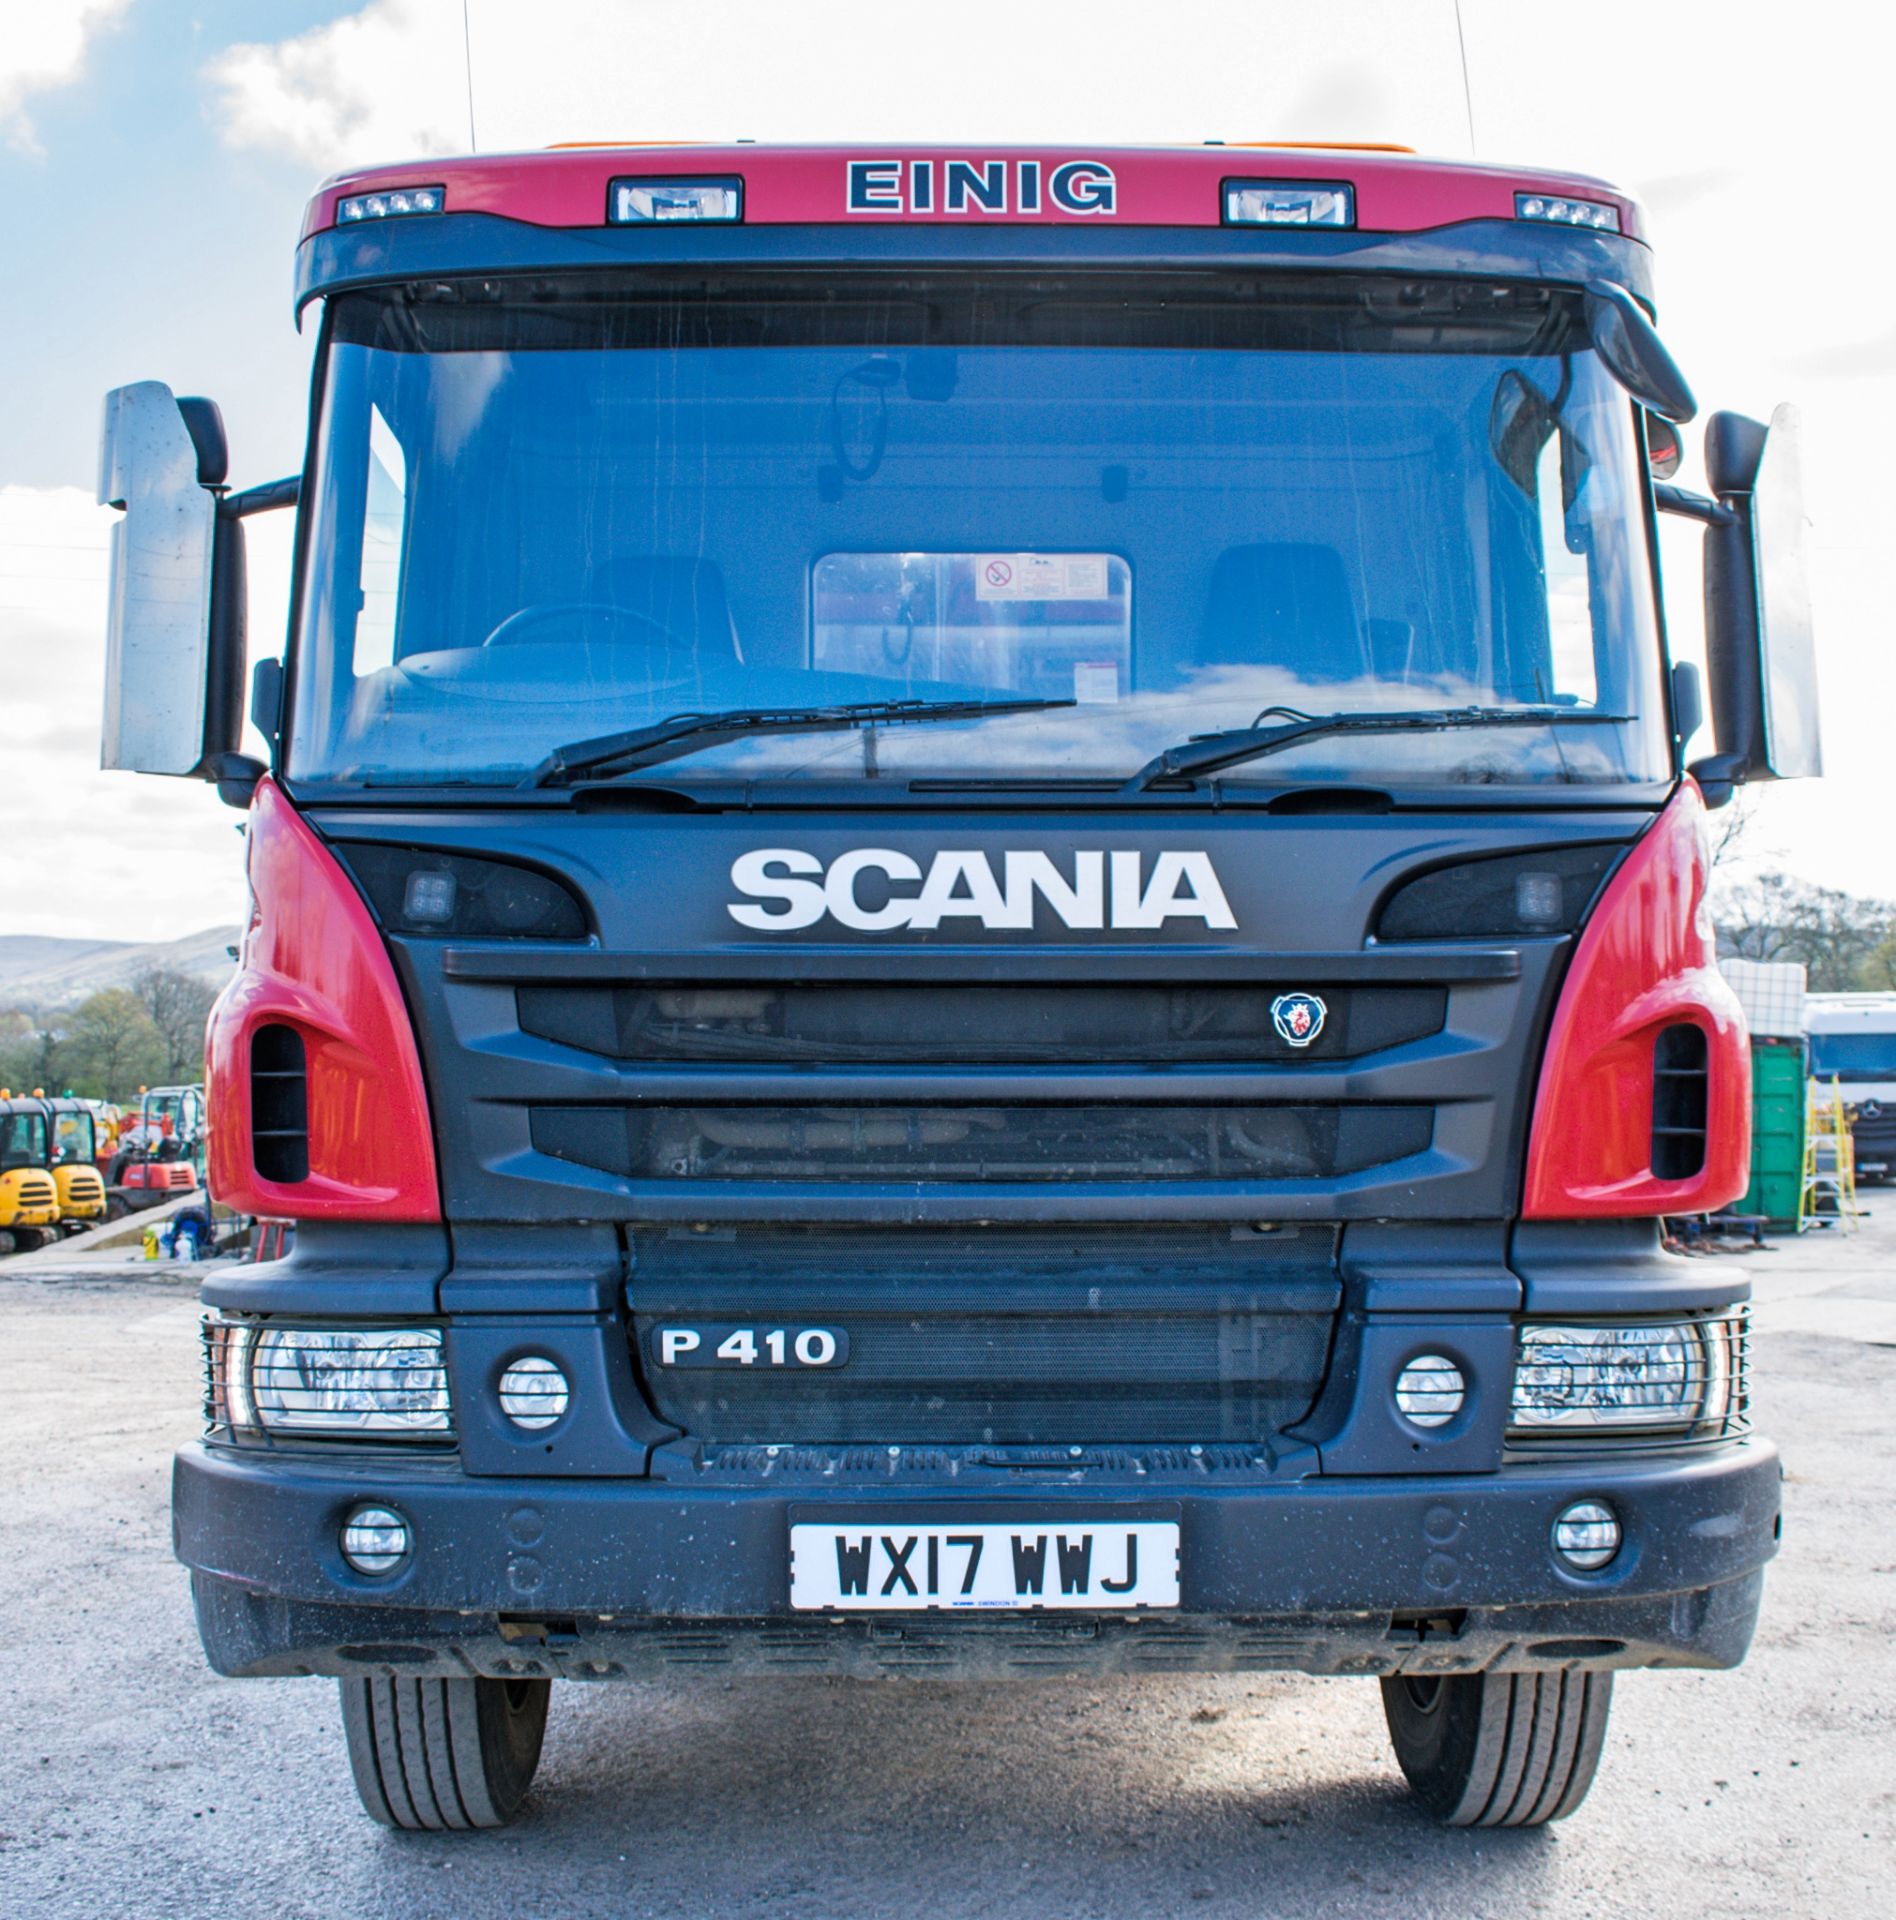 Scania P410 P-SRS C-Class 8 wheel 32 tonne tipper lorry Registration Number: WX17 WWJ Date of - Image 5 of 12